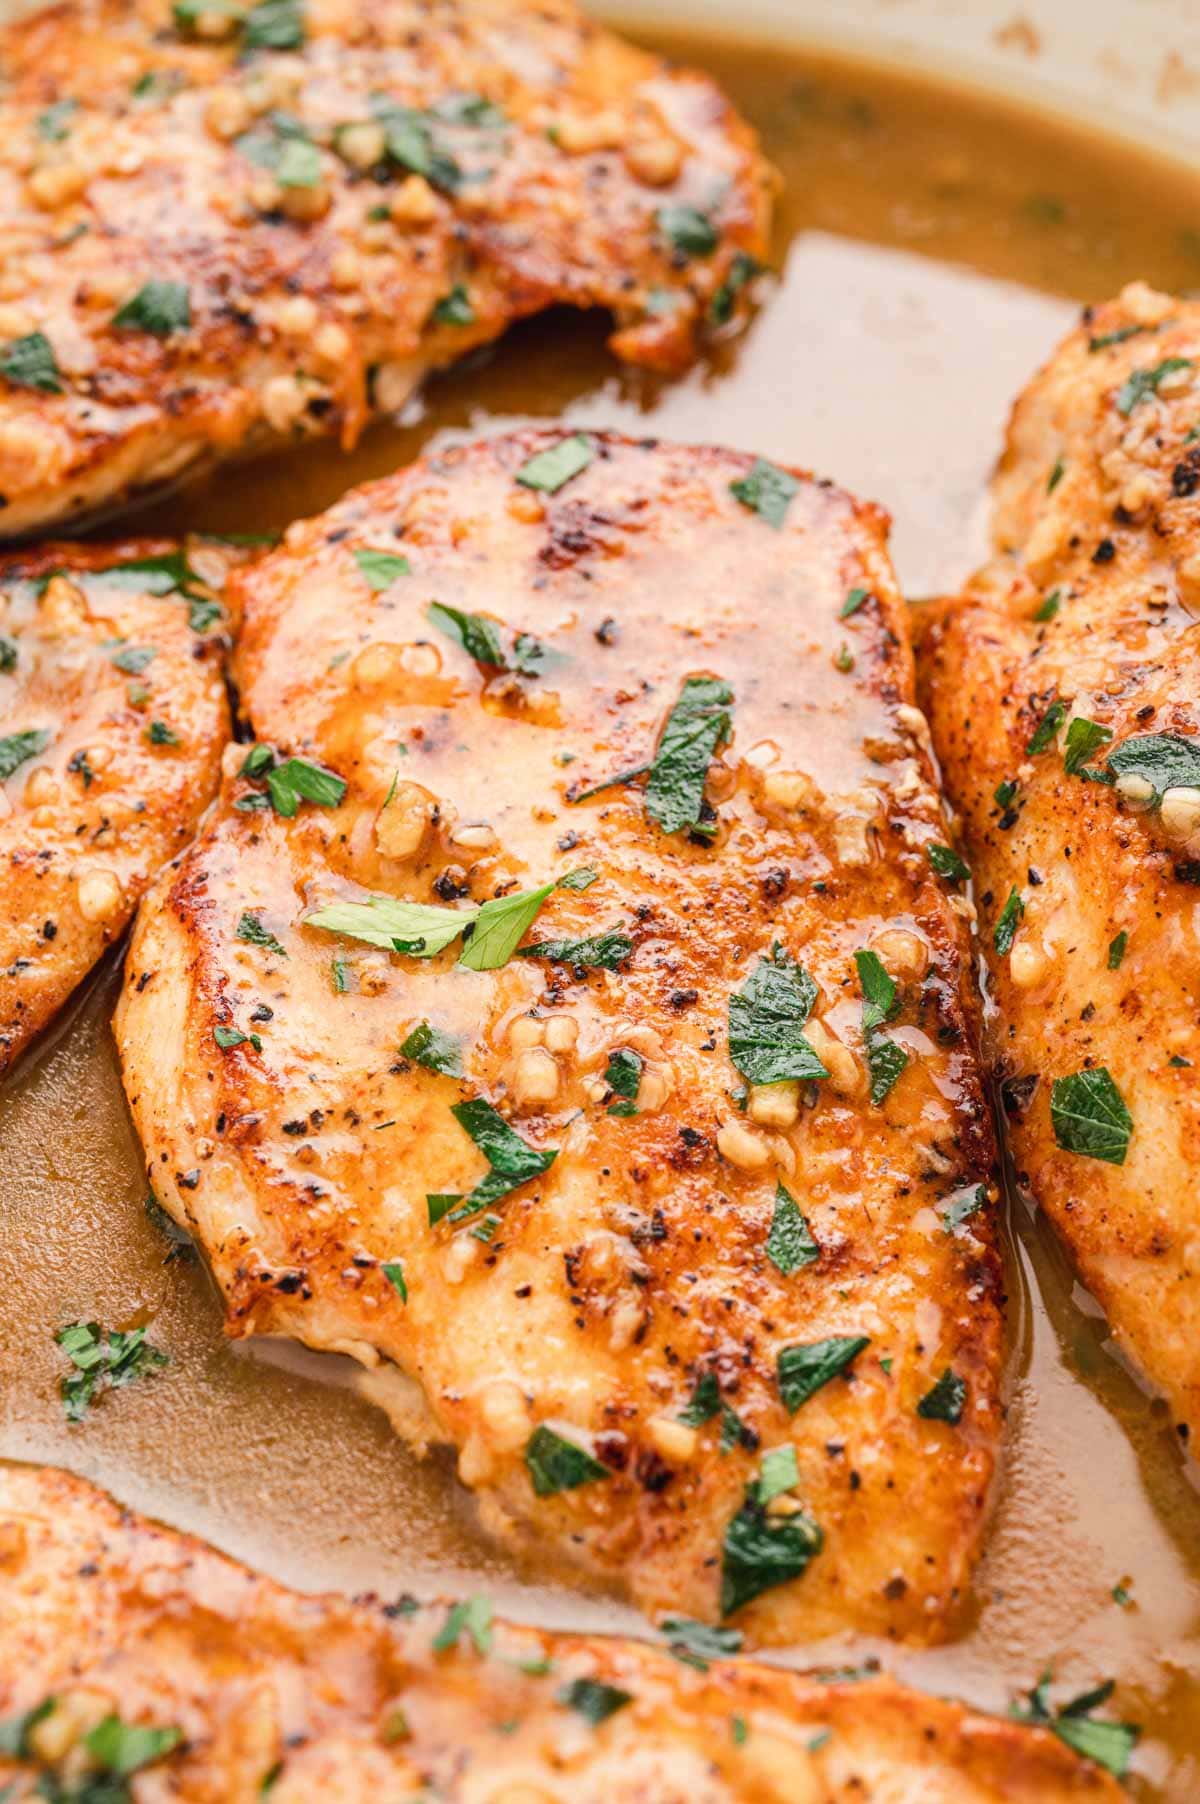 Chicken breast with garlic and parsley in a light brown butter sauce.